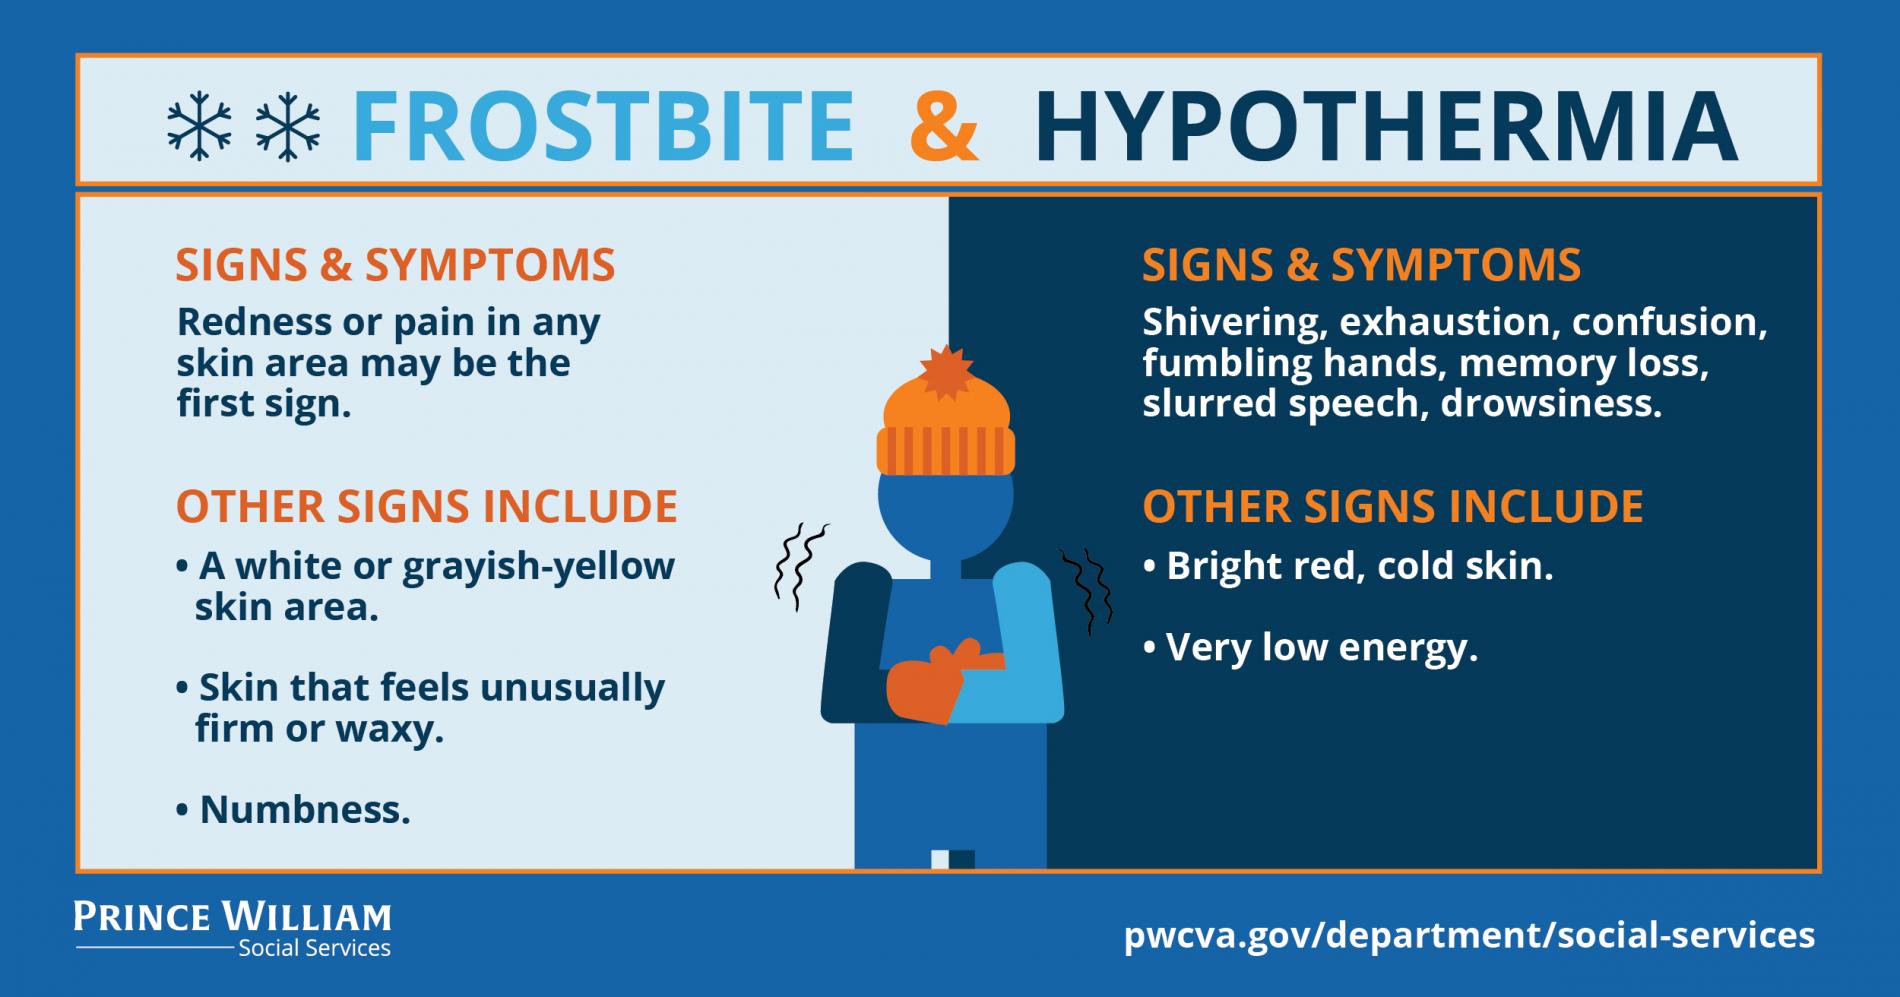 frostbite and hypothermia